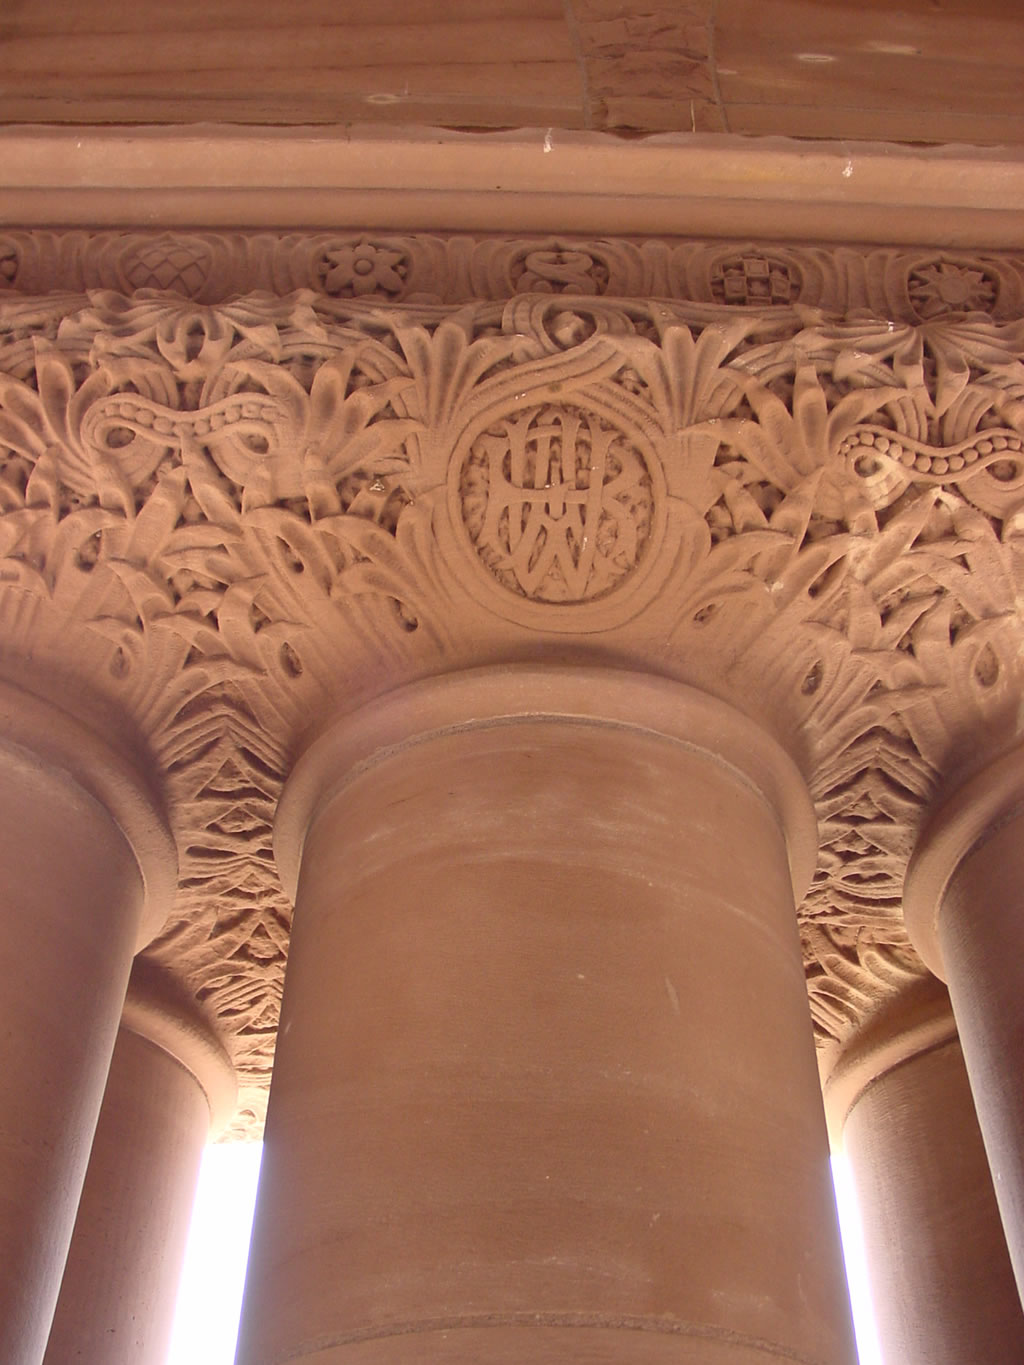 Architect Richard A. Waite’s initials, carved into the top of a column by the south entrance of the Legislative Building.